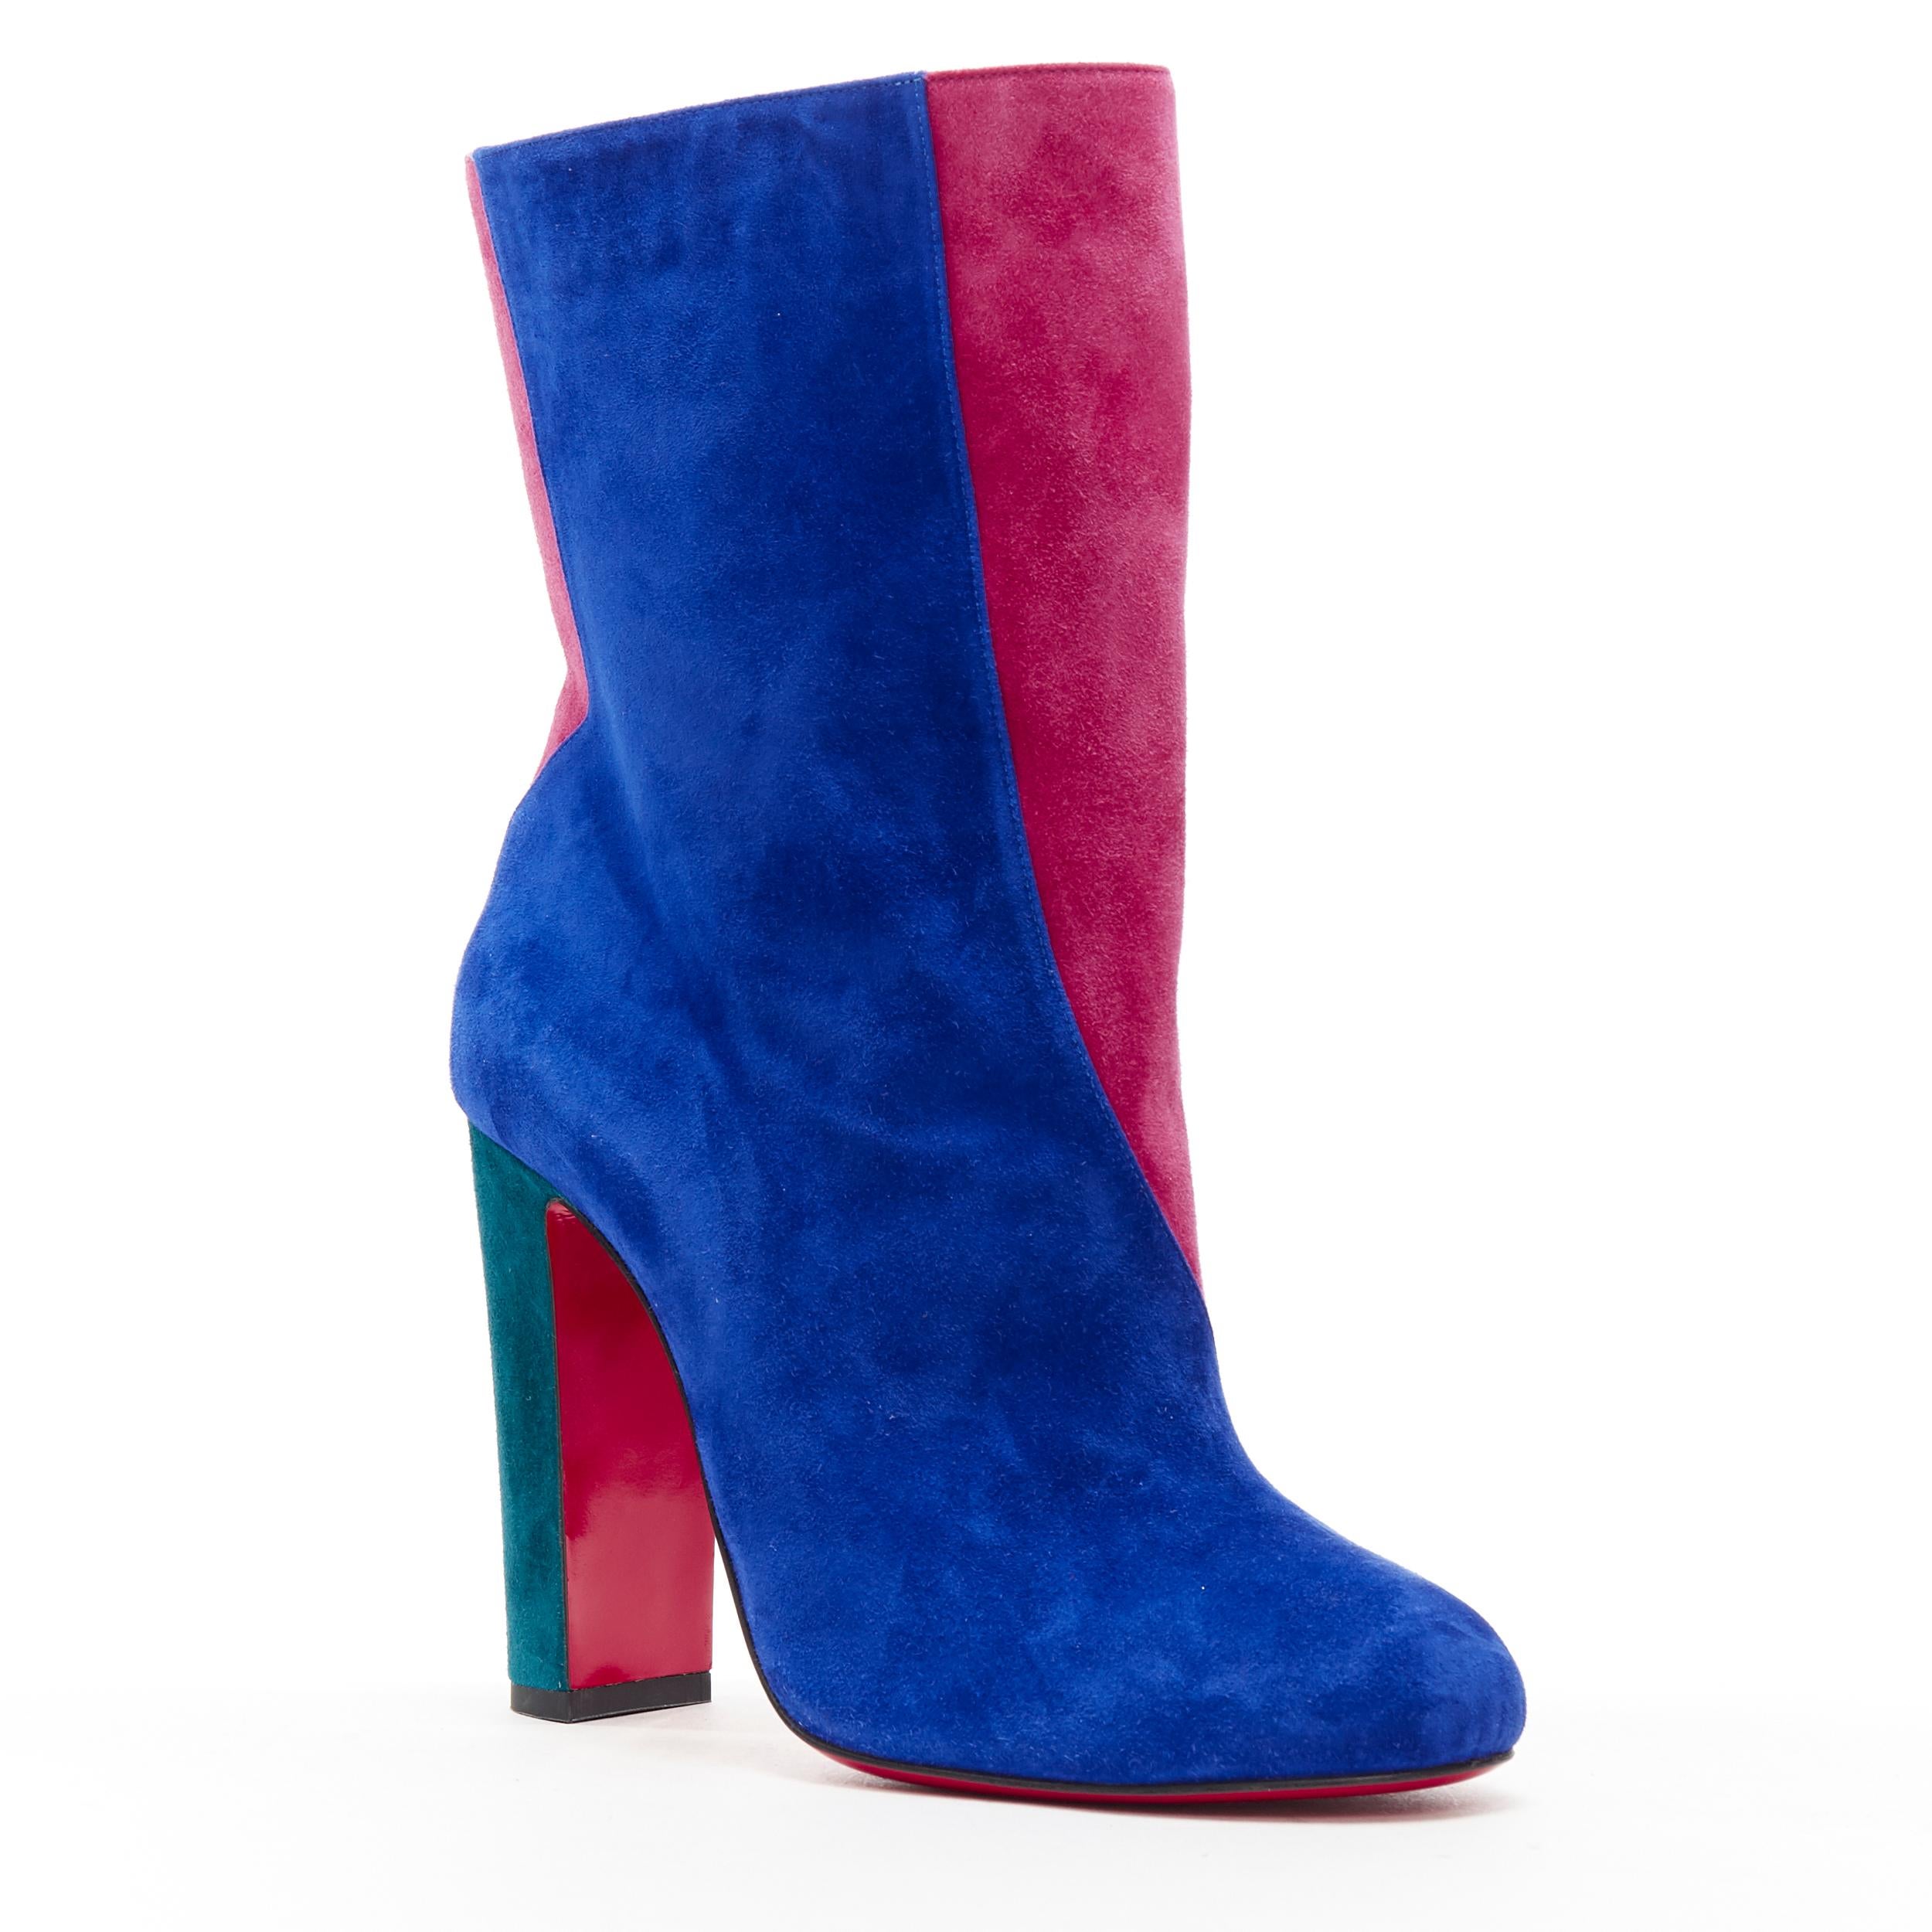 new CHRISTIAN LOUBOUTIN Botty Double 100 blue pink colorblocked suede booty EU39
Brand: Christian Louboutin
Designer: Christian Louboutin
Model Name / Style: Botty Double 100
Material: Suede
Color: Blue
Pattern: Solid
Closure: Pull on
Extra Detail: